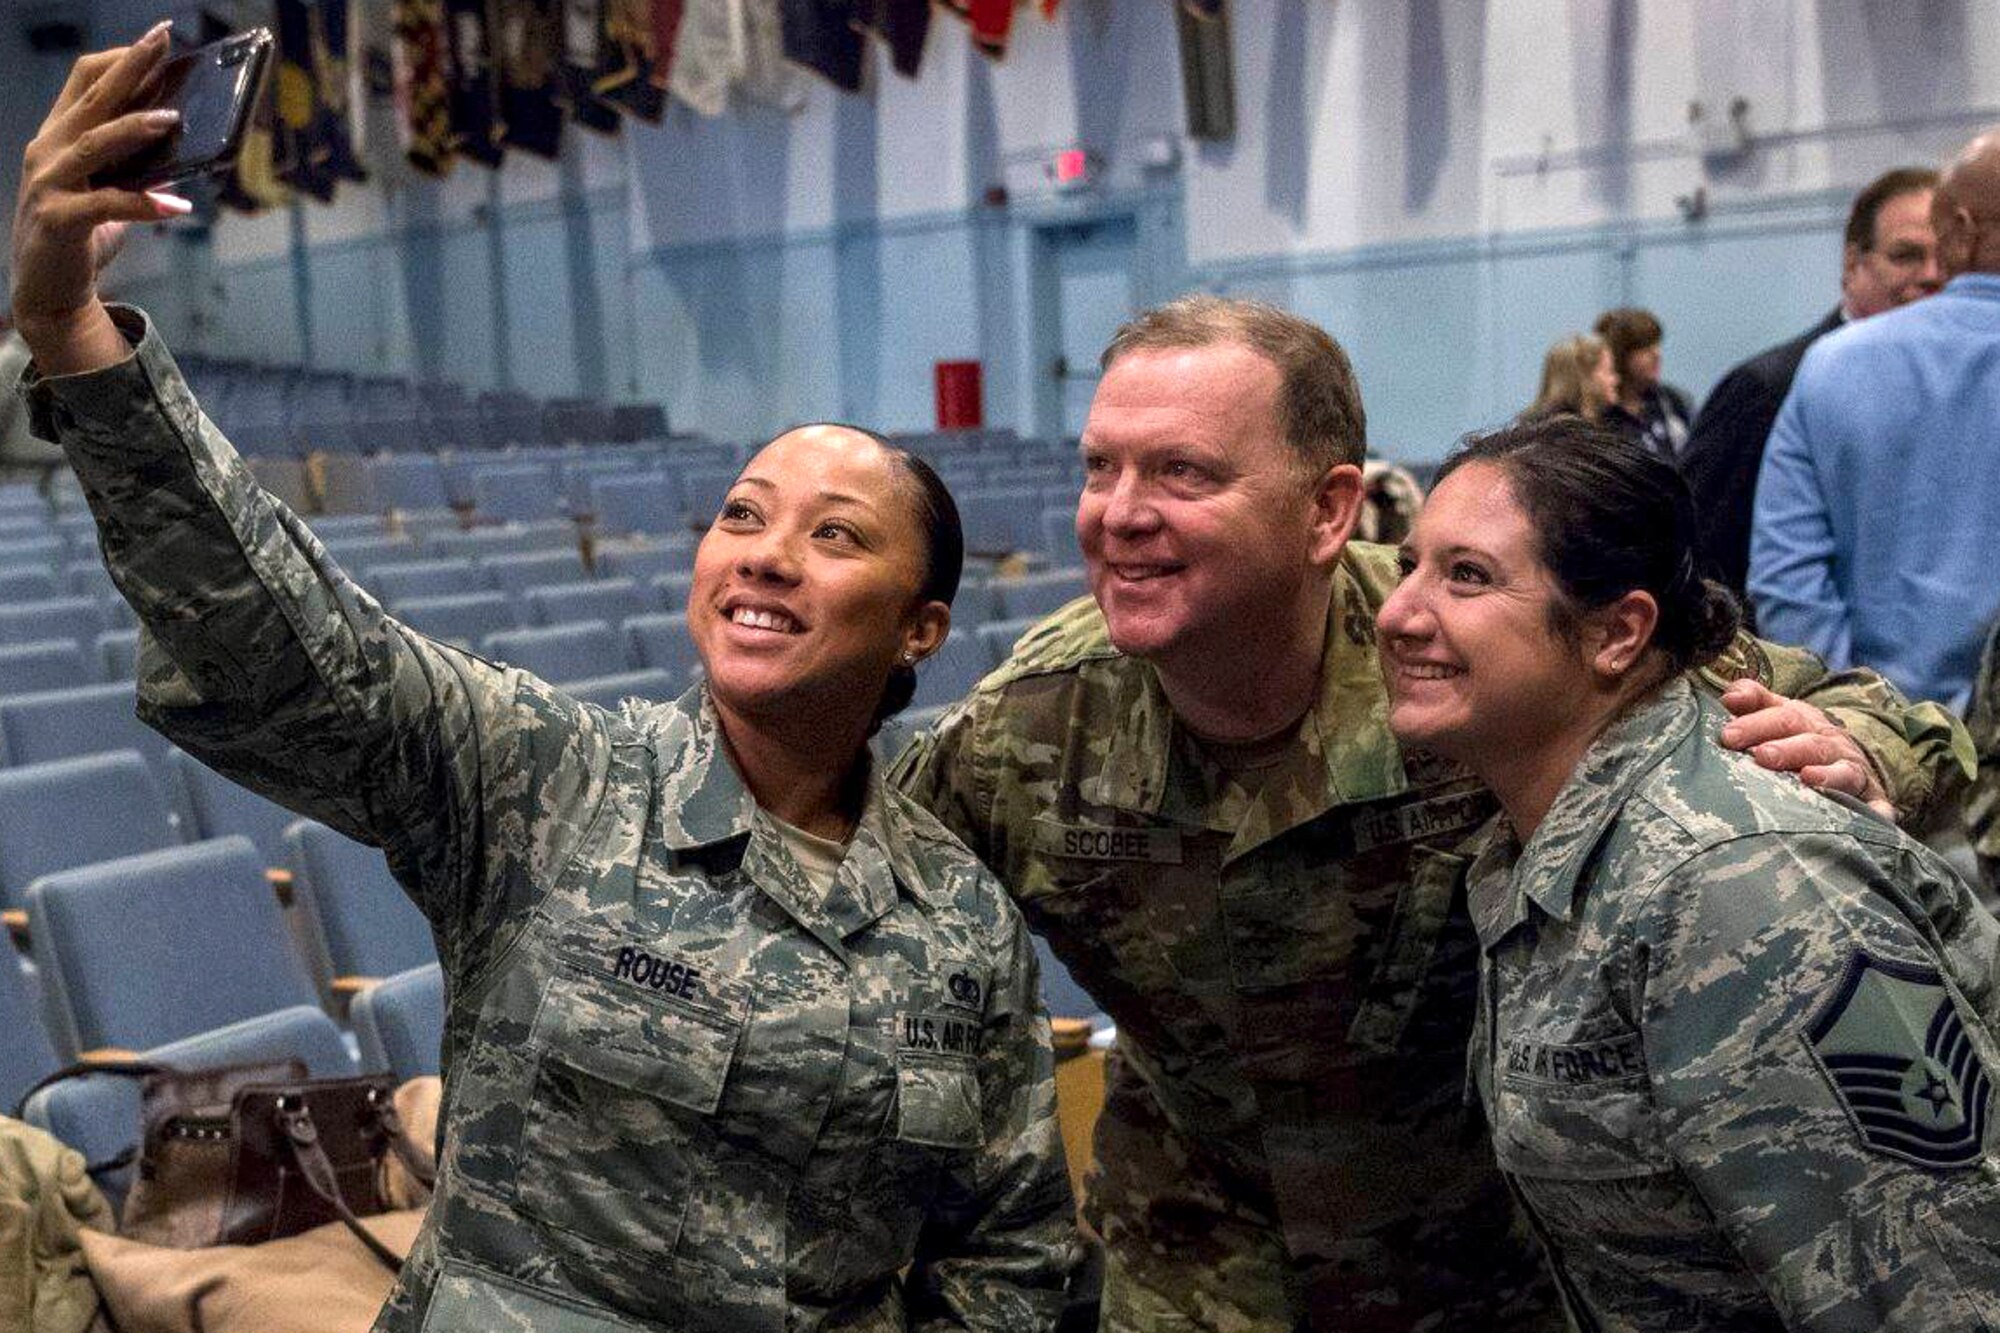 Lt. Gen. Richard W. Scobee, Commander, Air Force Reserve Command, posses for a selfie with Airmen during a visit to the 514th Air Mobility Wing on Joint Base McGuire-Dix-Lakehurst, N.J., January 12, 2018. Scobee visited the 514 AMW to become more familiar with the units capabilities and the Reserve Citizen Airmen that serve within them. (U.S. Air Force photo by Staff Sgt. Sean M. Evans)